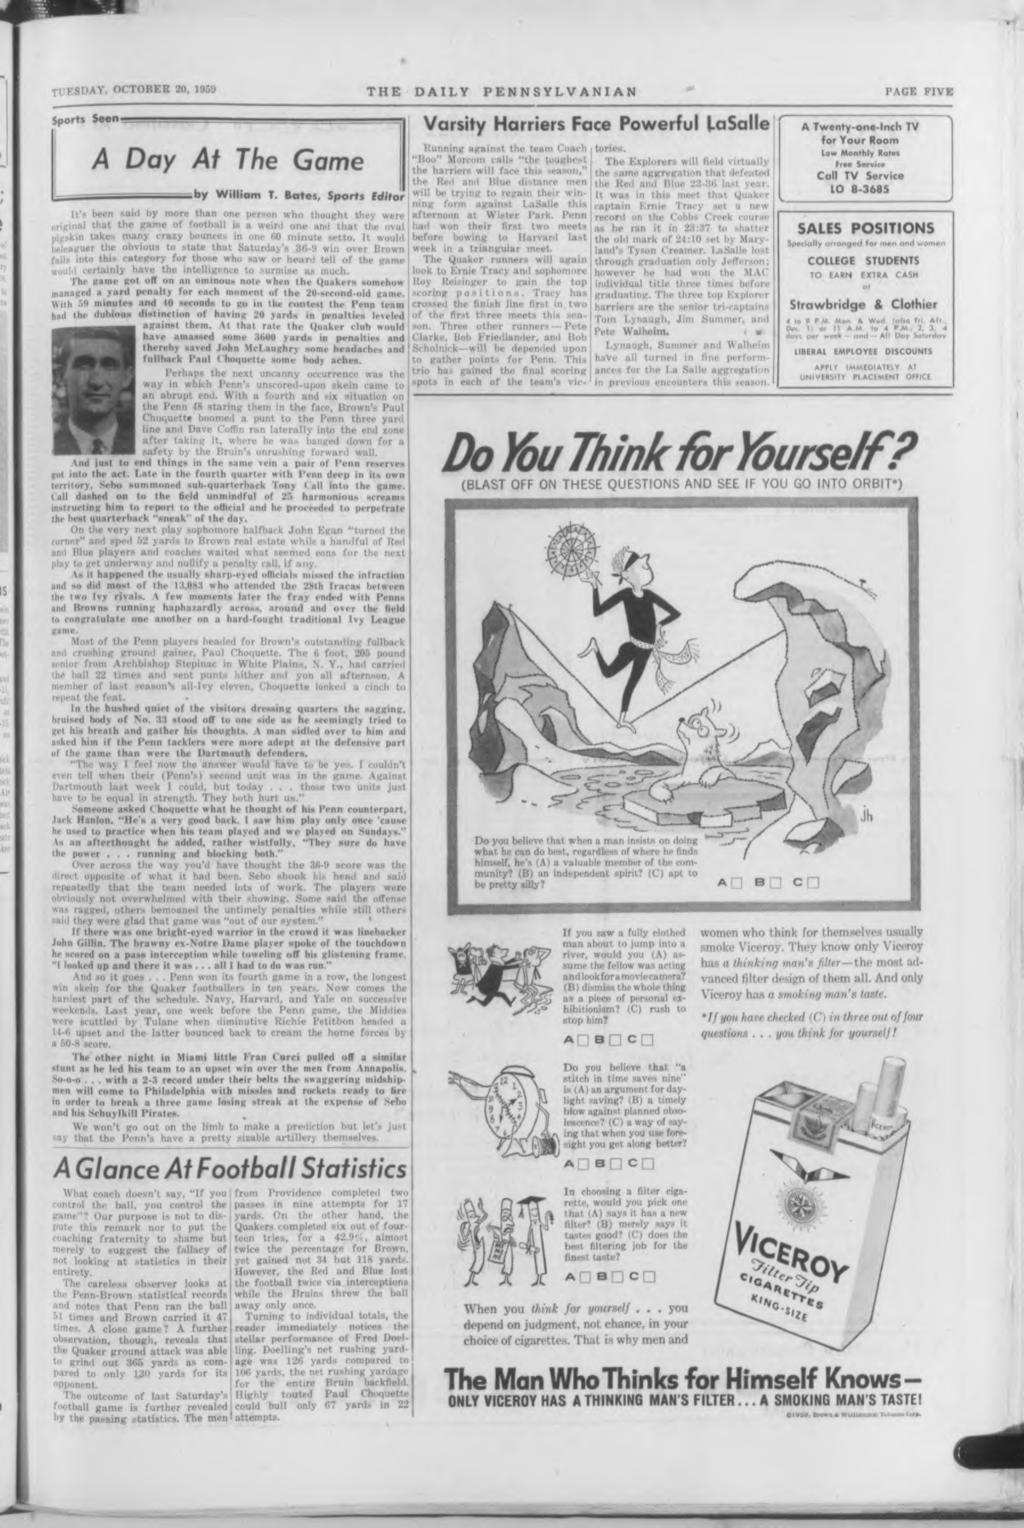 TUE m M. THE DALY PENNSYLVANAN PAGE FVE Sports Seen- A Day At The Game by Wllam T. Bates, Sports Edtor ho thought orgnal that the game ll s werd MM and that craxy b t would er tfv 'hat Sat.